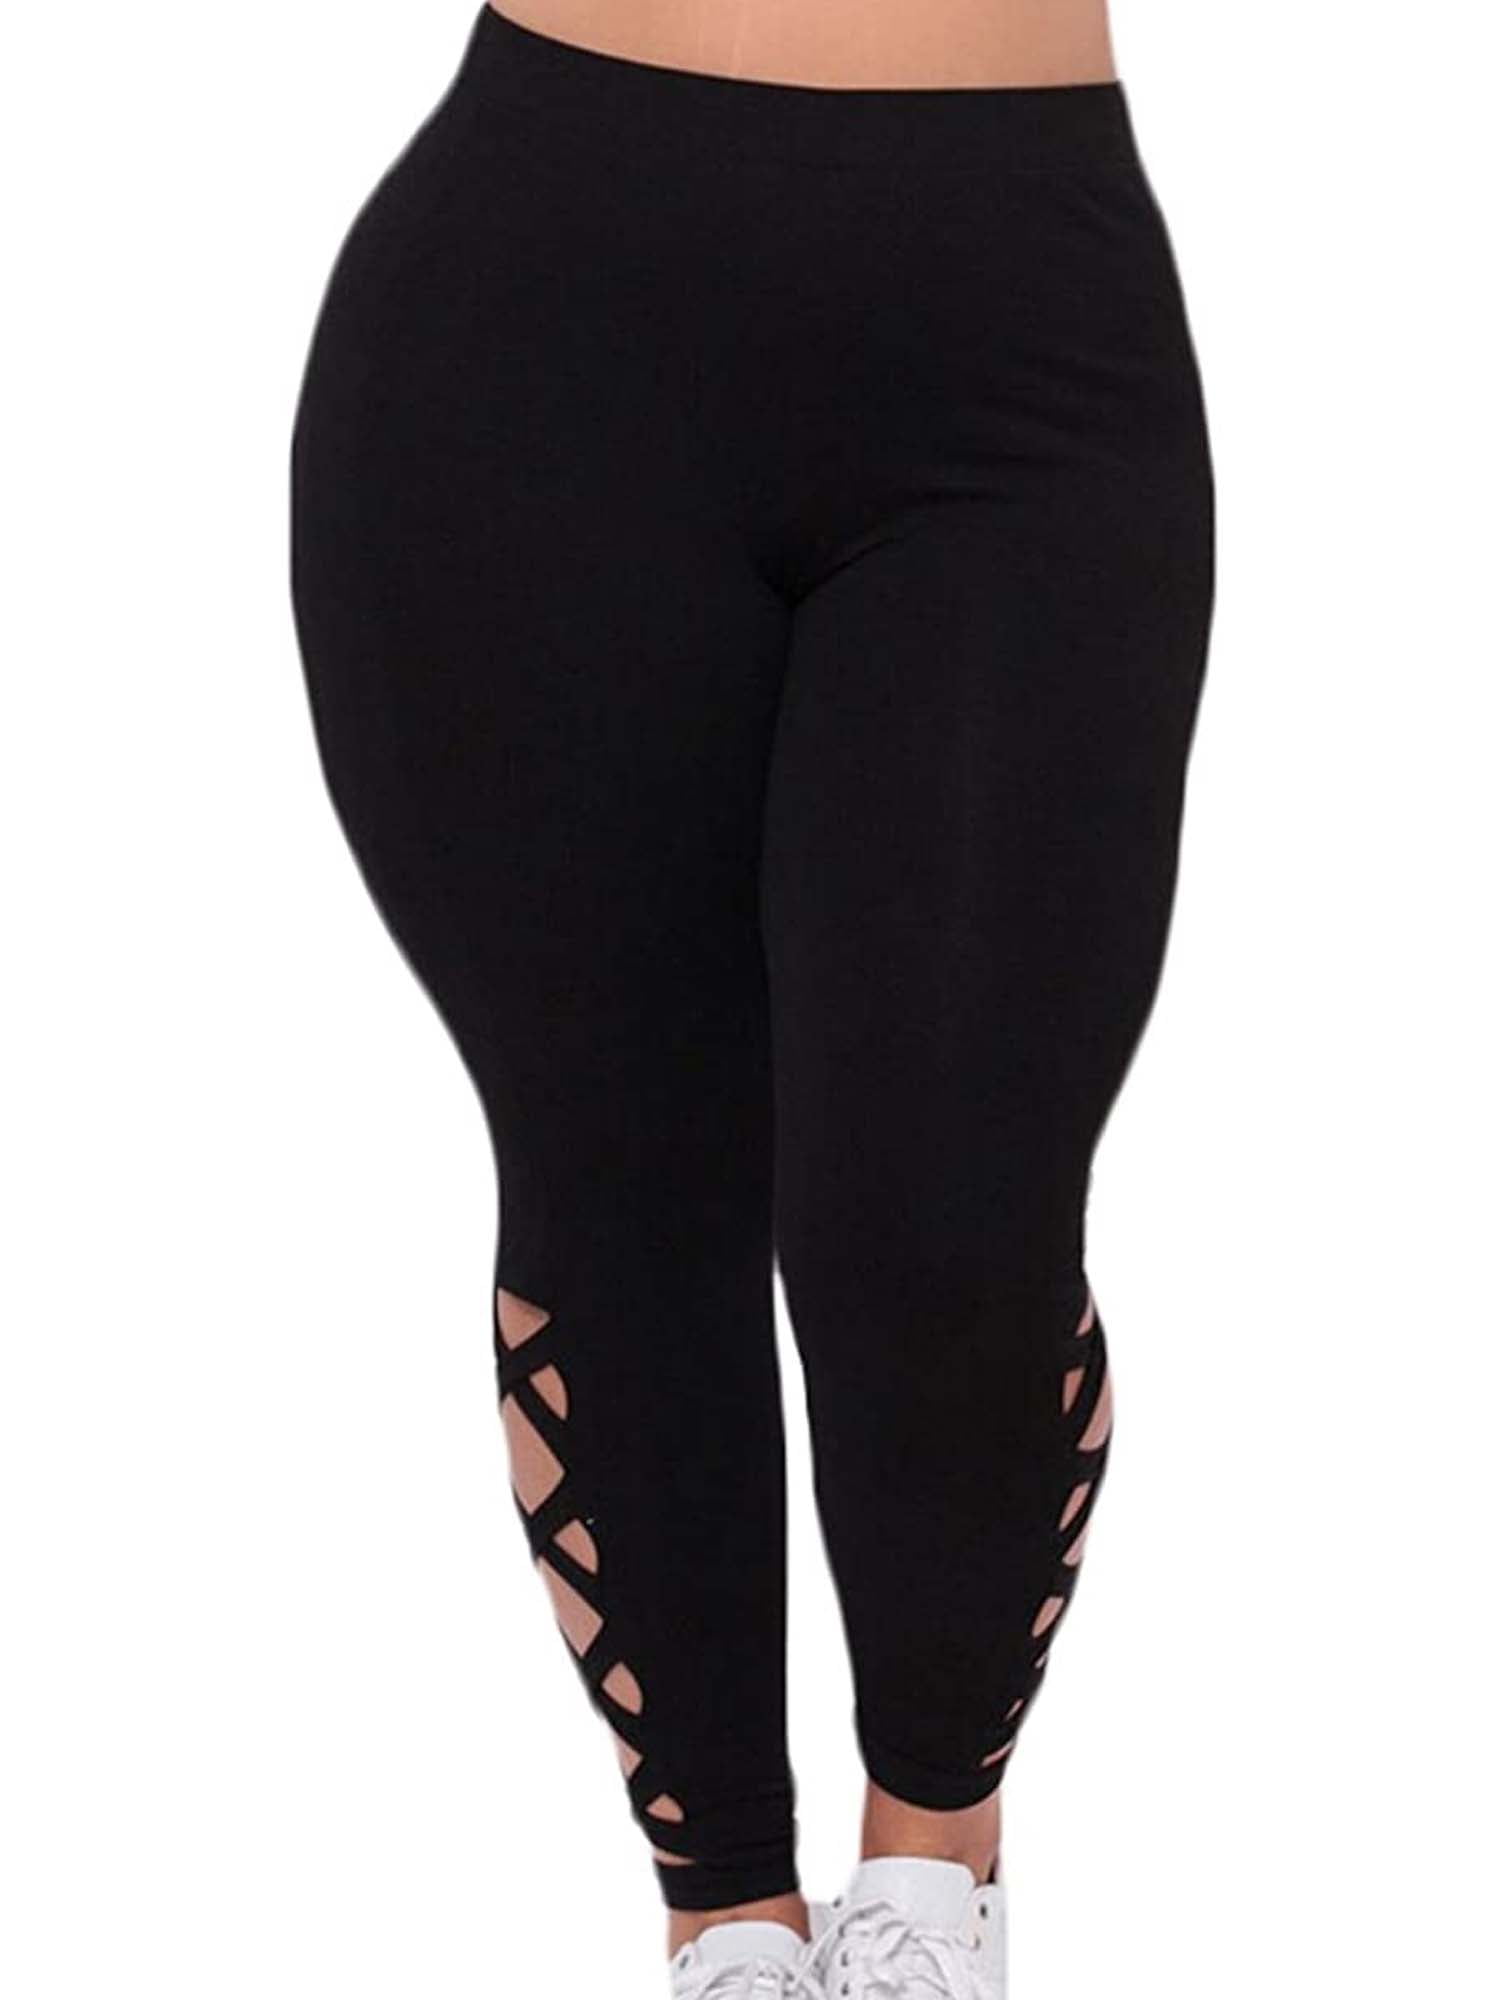 Joyshaper High Waisted Cutout Leggings Strappy Gym Tights for Women with Pockets Running Workout Pants Black 